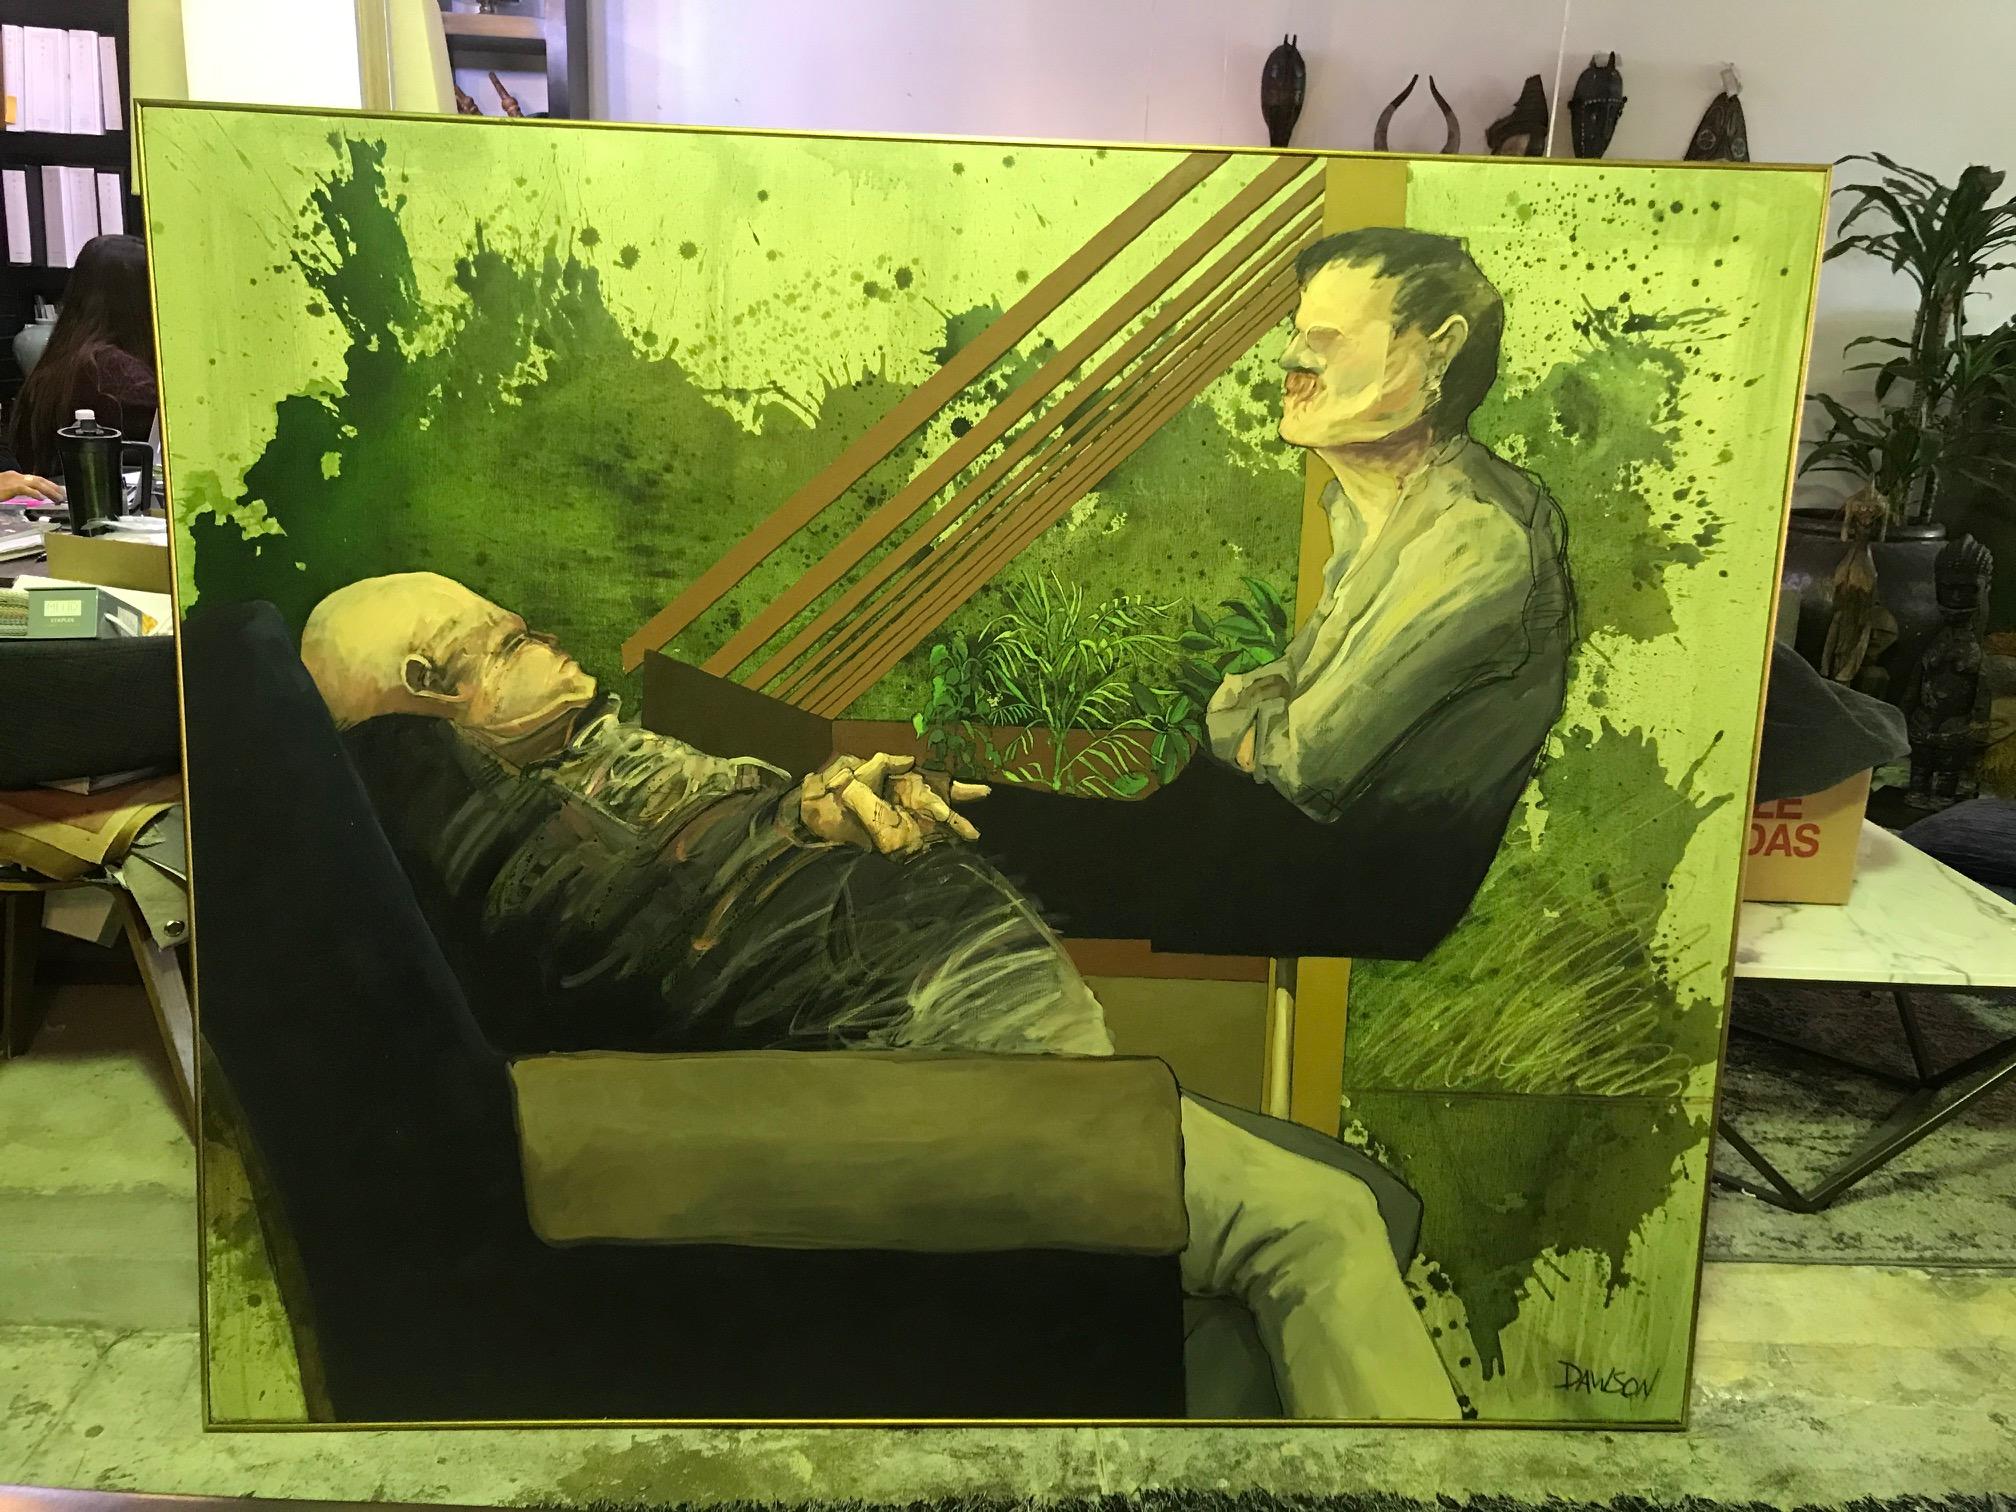 Hand-Painted John Dawson Signed Exceptionally Large Surreal Oil Painting of Two Figures